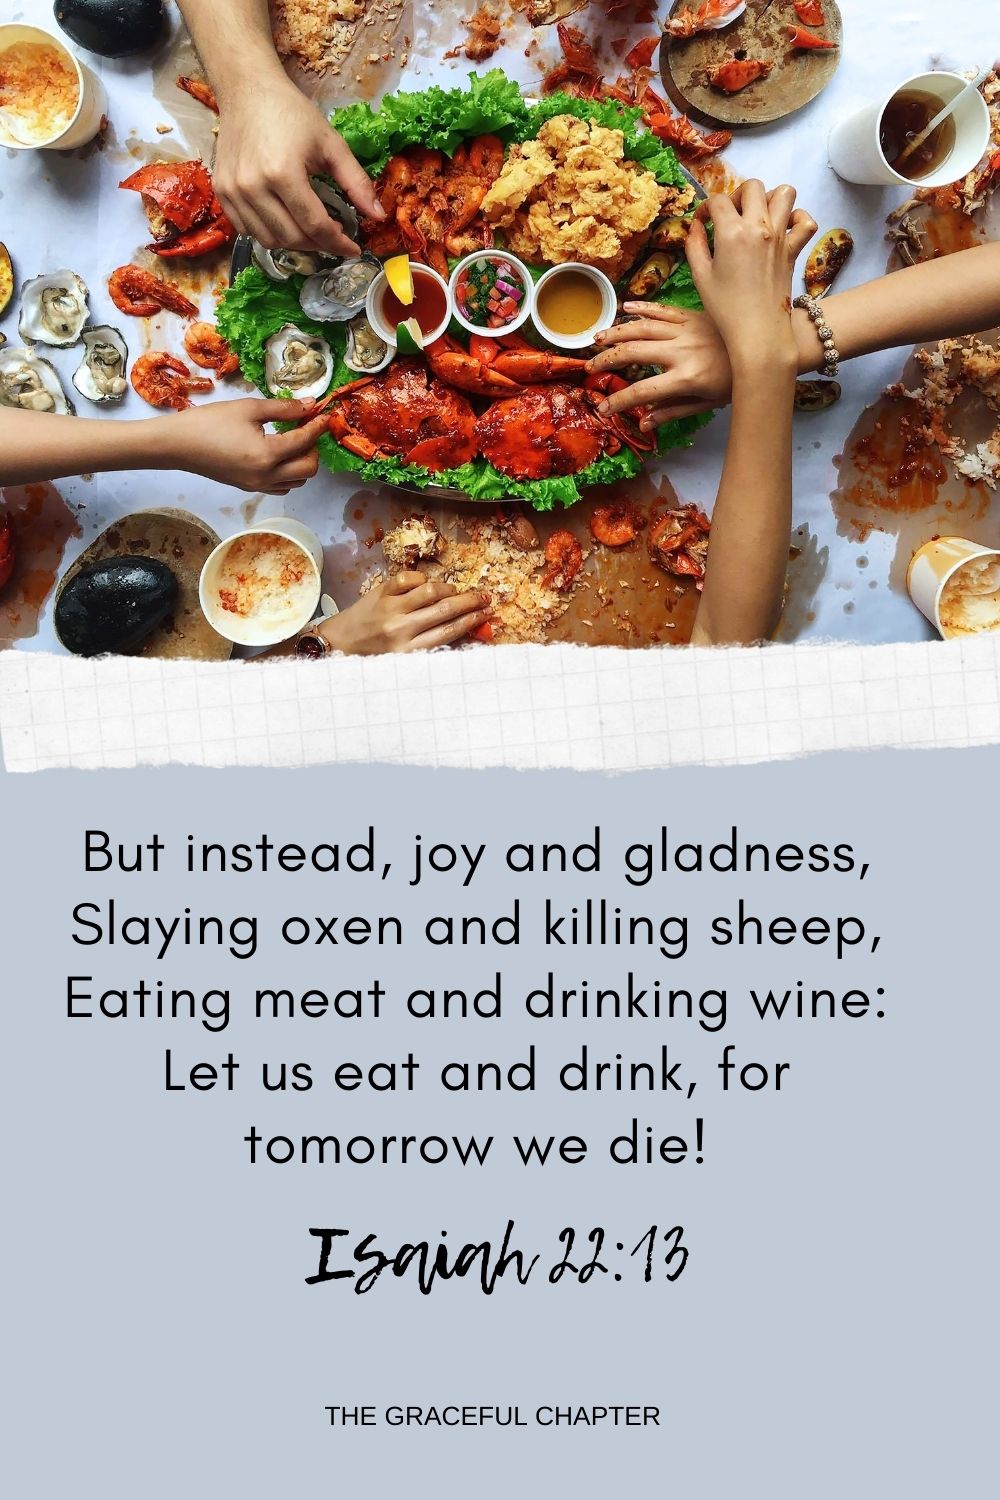 But instead, joy and gladness, Slaying oxen and killing sheep, Eating meat and drinking wine: Let us eat and drink, for tomorrow we die! Isaiah 22:13